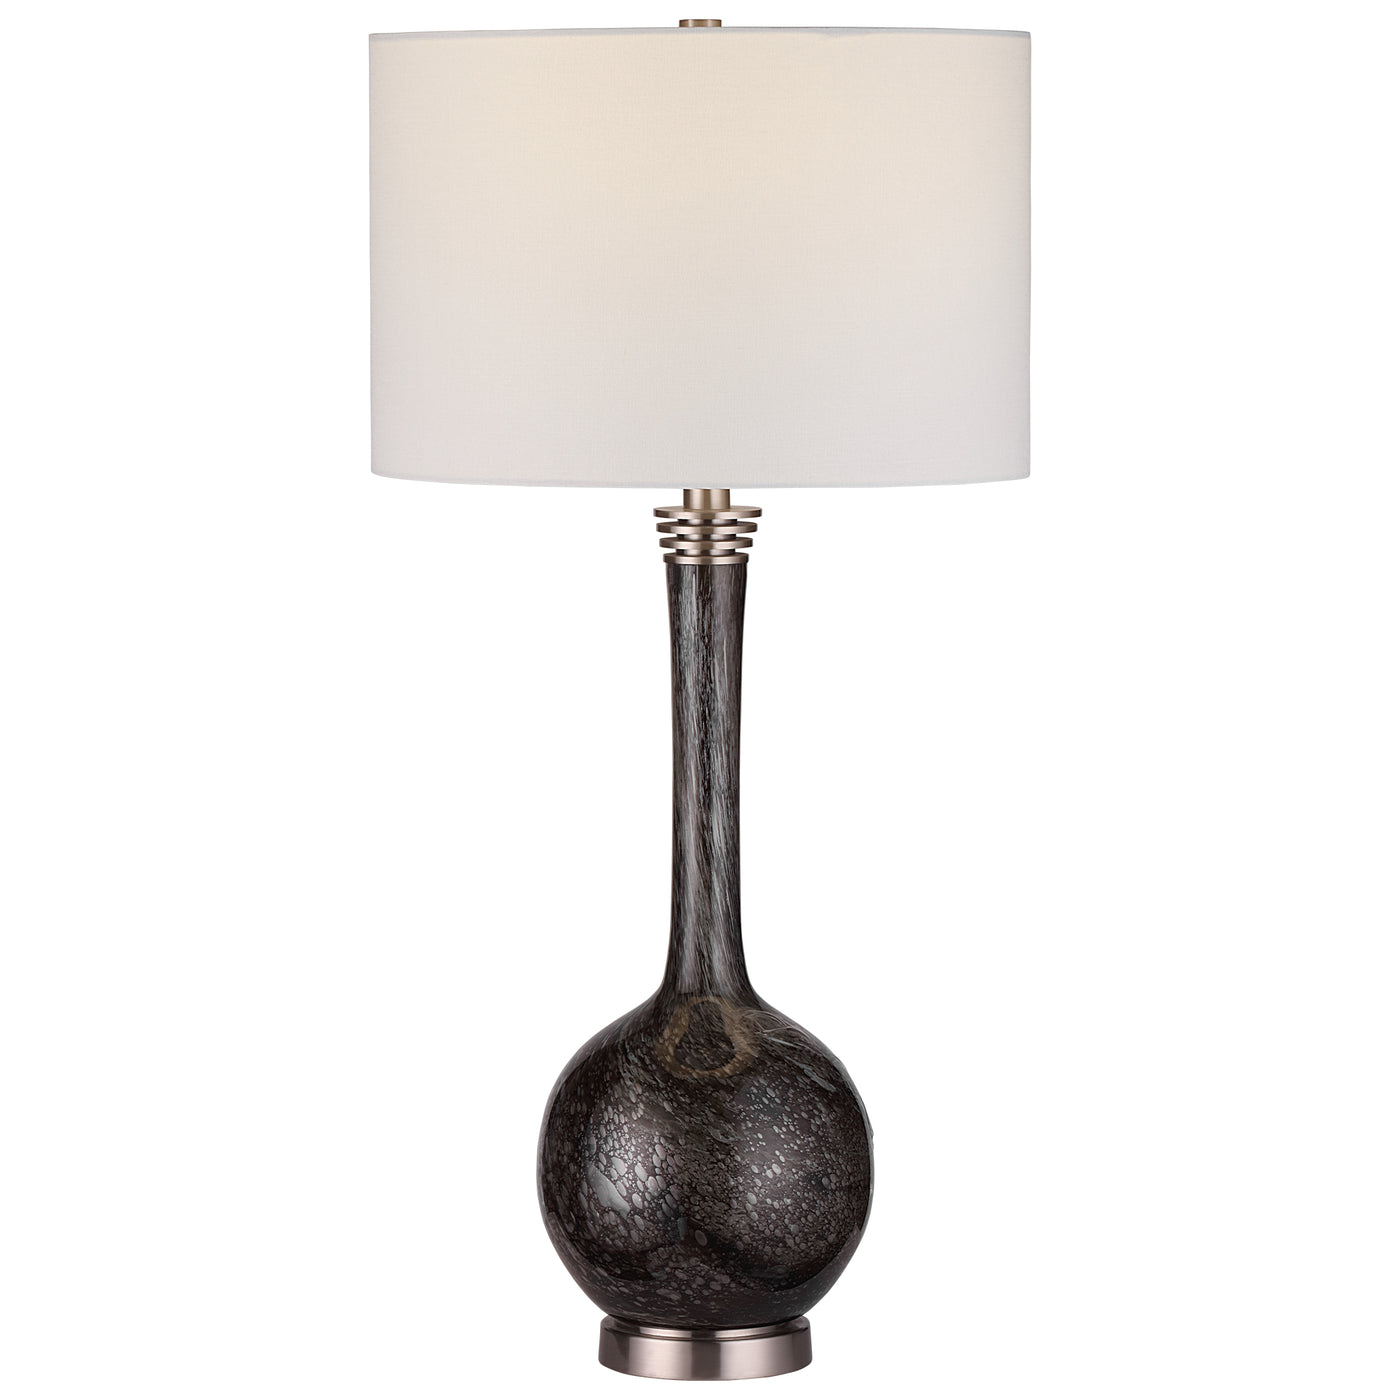 Showcasing A Masculine Look, This Buffet Lamp Features An Ebony And Charcoal Bubble Glass Base Accented By Contemporary Br...